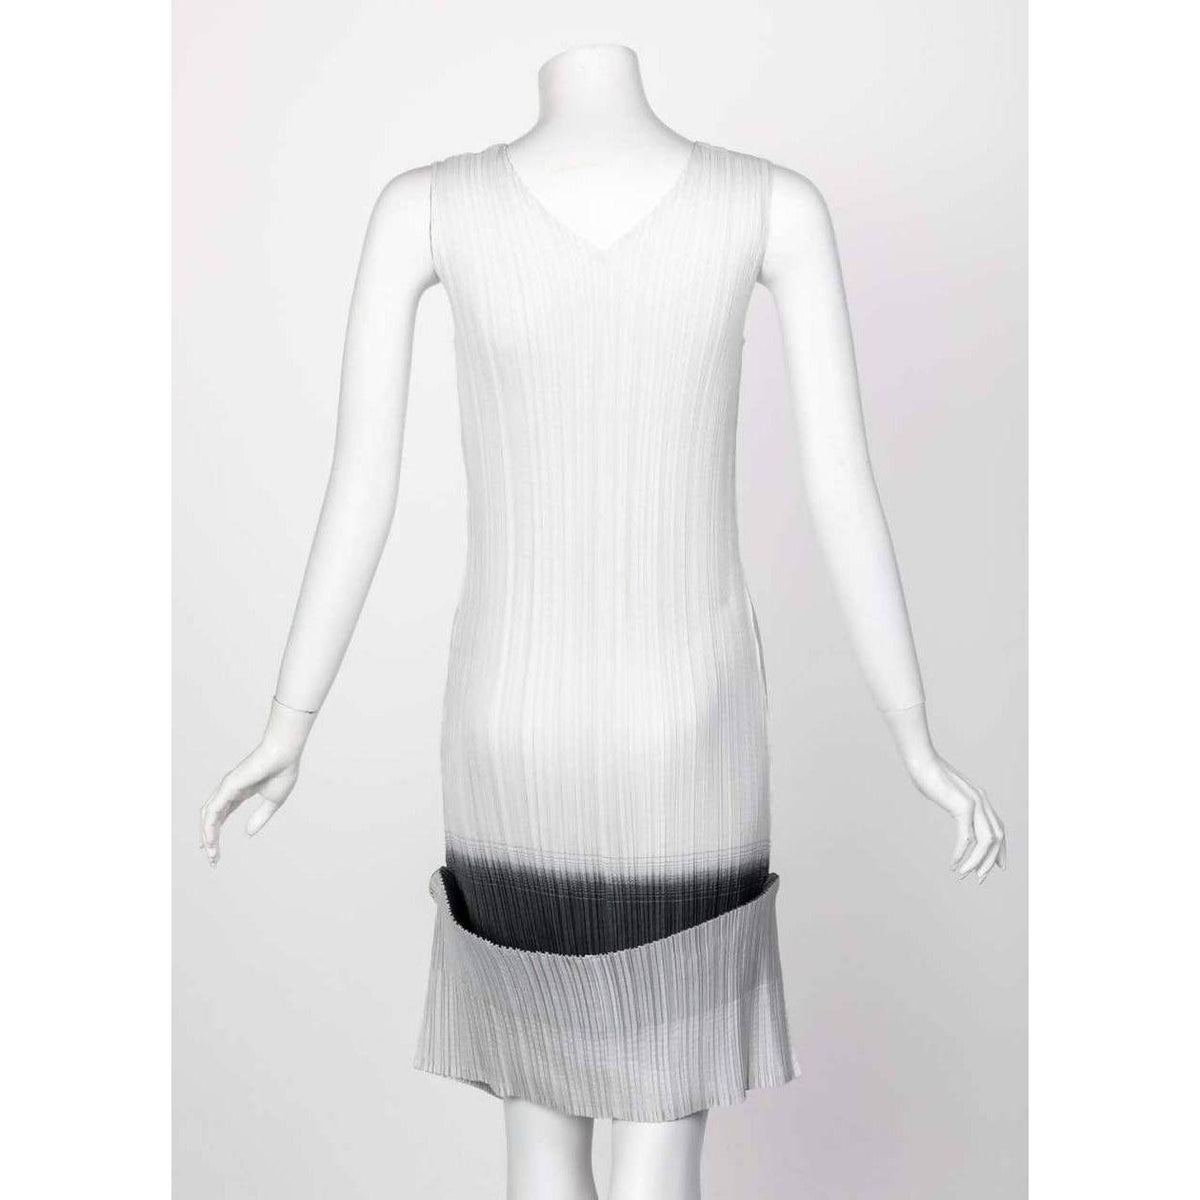 Pre-Owned ISSEY MIYAKE Two-Way White Grey Sleeveless Sculptural Dress | Size S - theREMODA